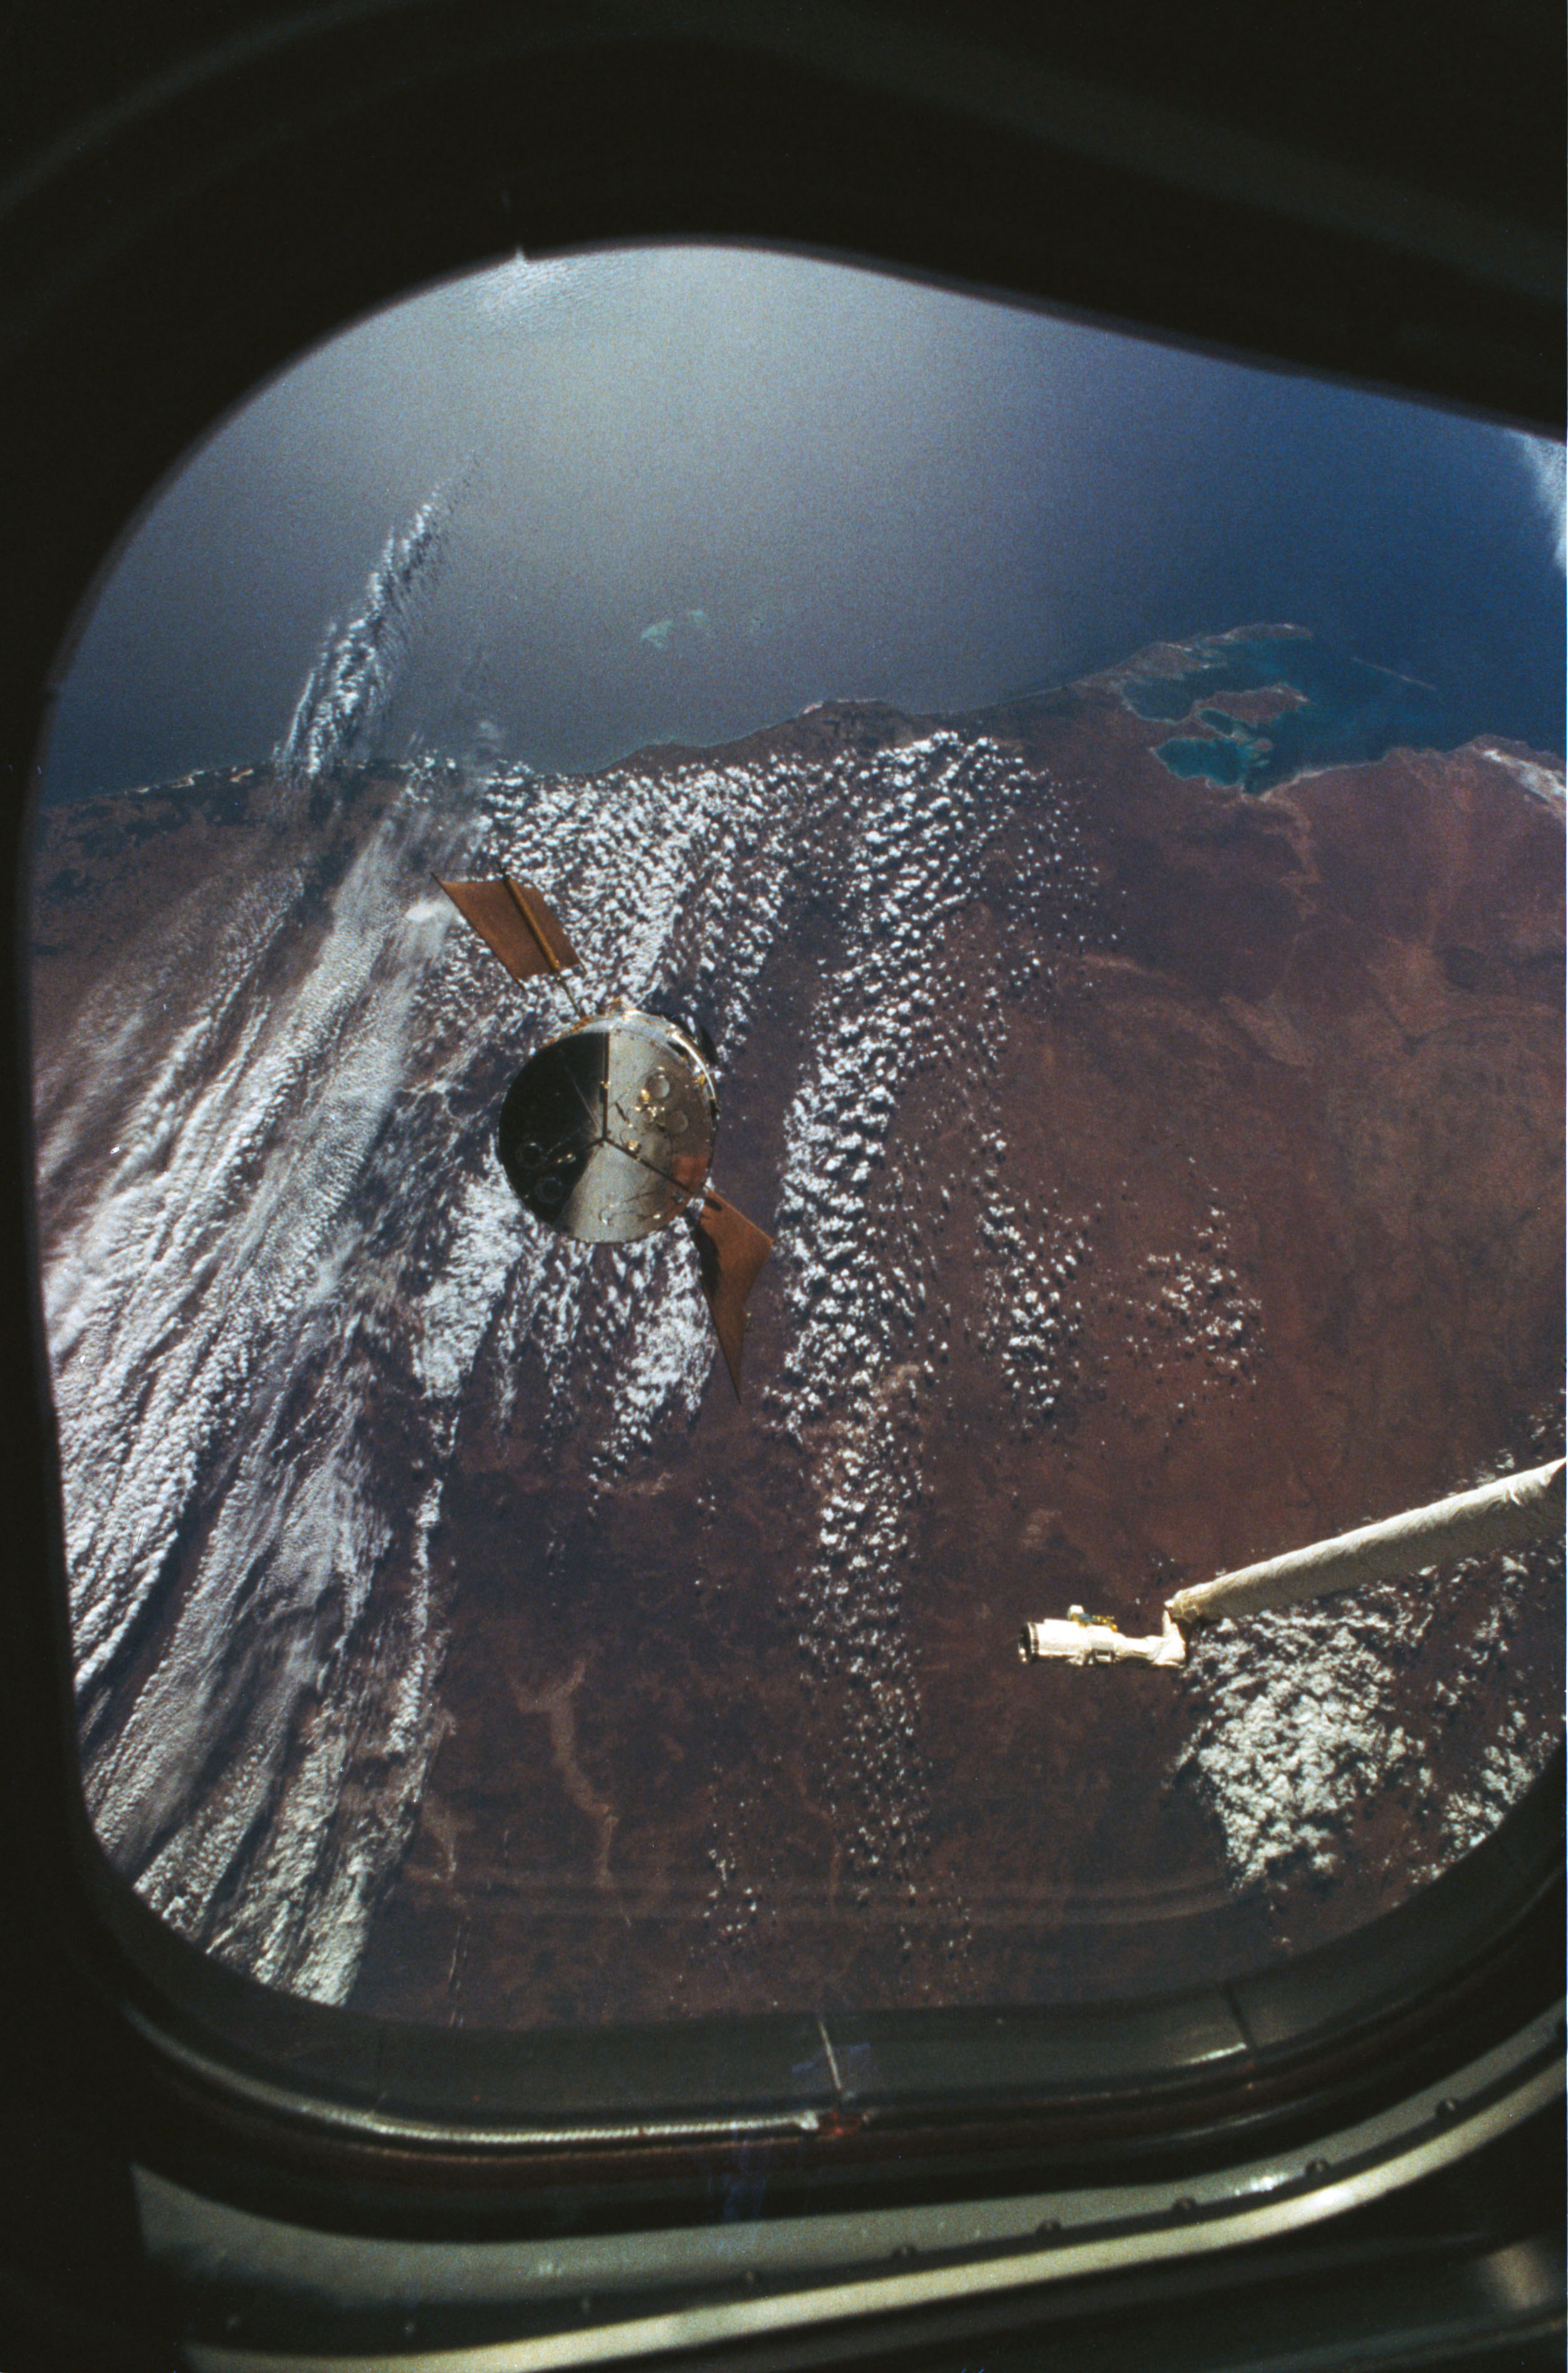 Endeavour approach to the Hubble Space Telescope